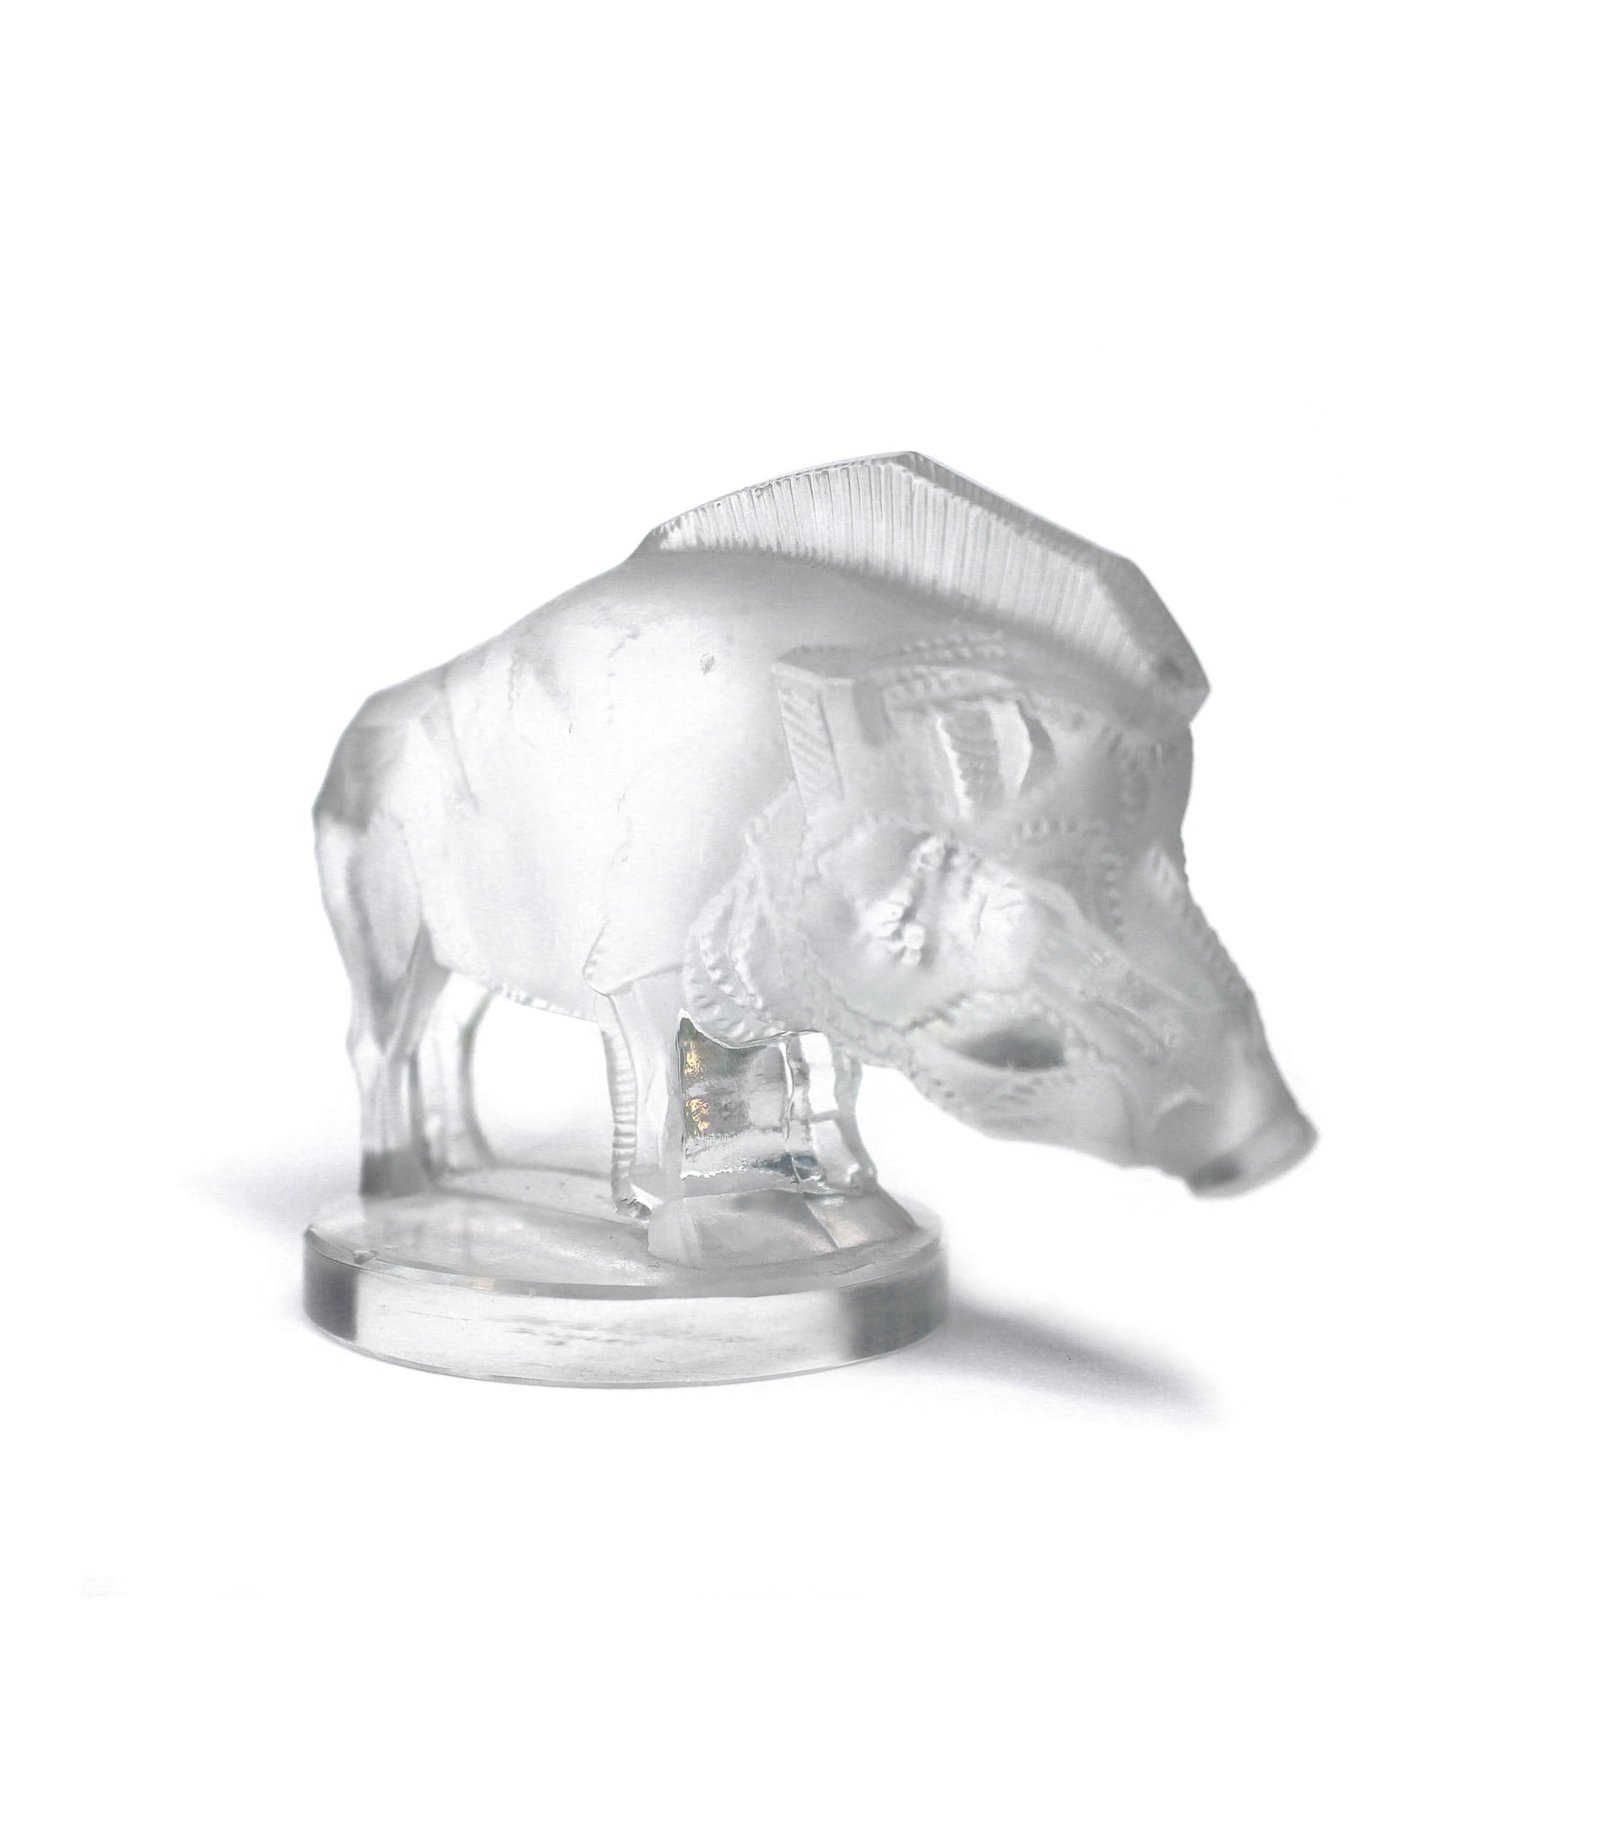 One of the 29 designs of car mascots by René Lalique. This original pre war example of the Sanglier (wild boar) is as beautiful as it was back in the late 1920s. Measures 6,5cm x 9,0cm aprox. Very good condition. Clear glass. Small (2mm chip) at the top edge of the round base. Clear moulded mark R Lalique France between legs and stencilled R Lalique France under the base.